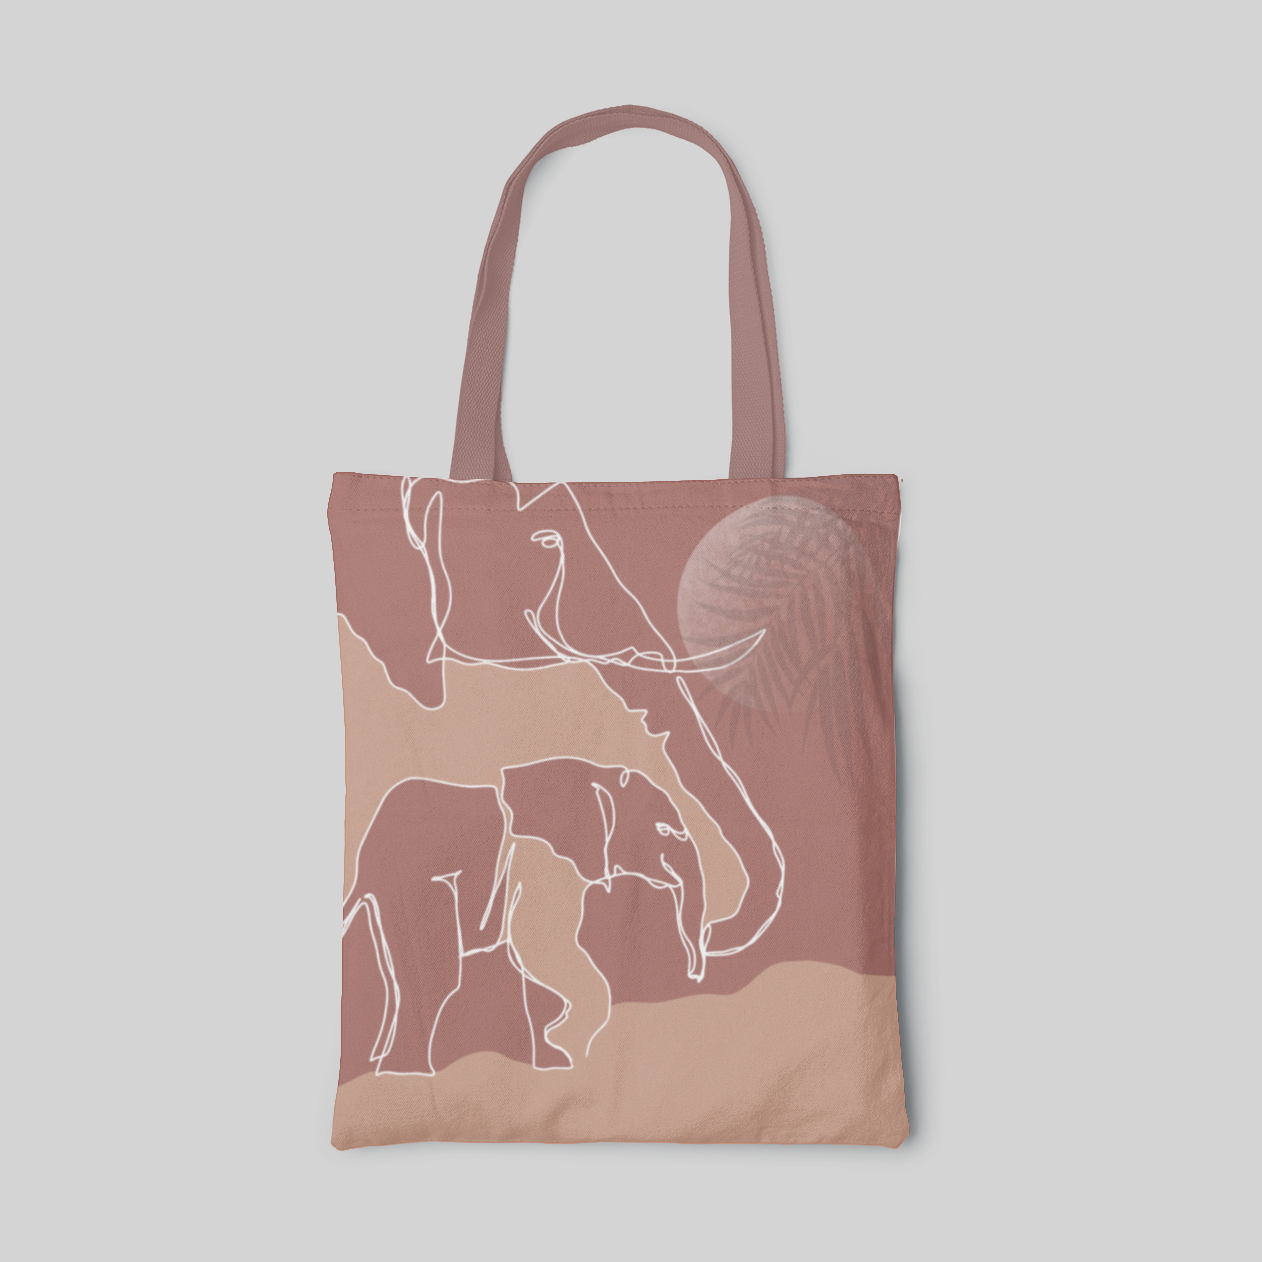 Beige theme designed tote bag with line drawing of elephants, a moon with plant shadow next to the elephants, front side